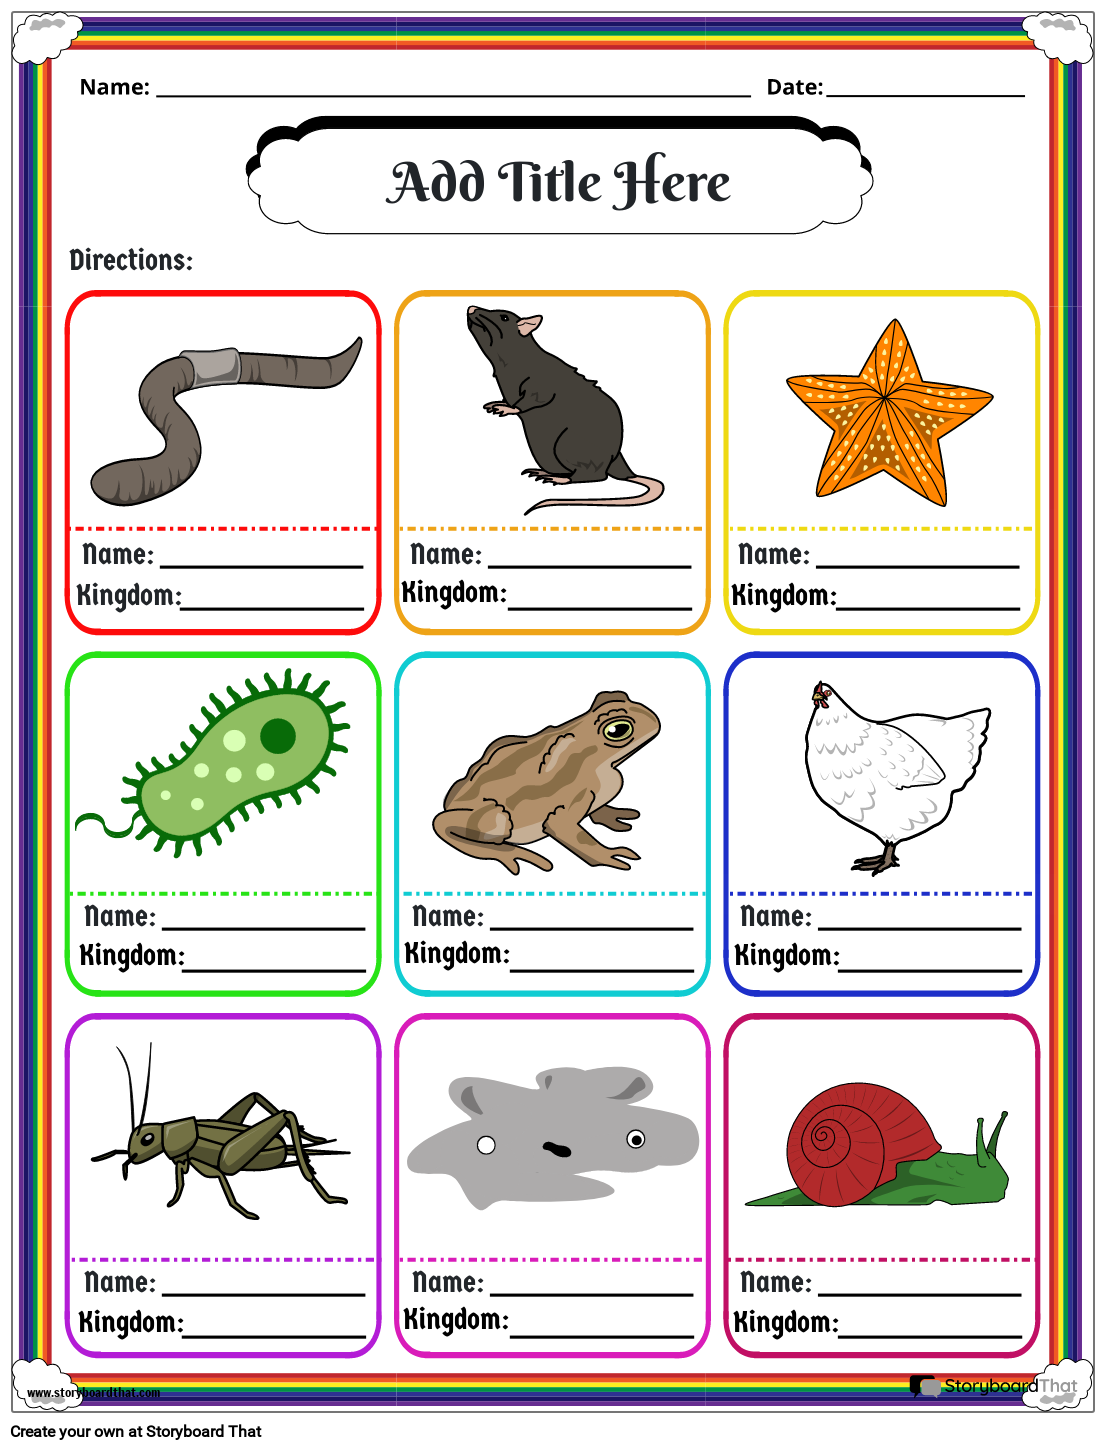 Classification of Animals and Microbes: Six Kingdoms of Life Worksheet